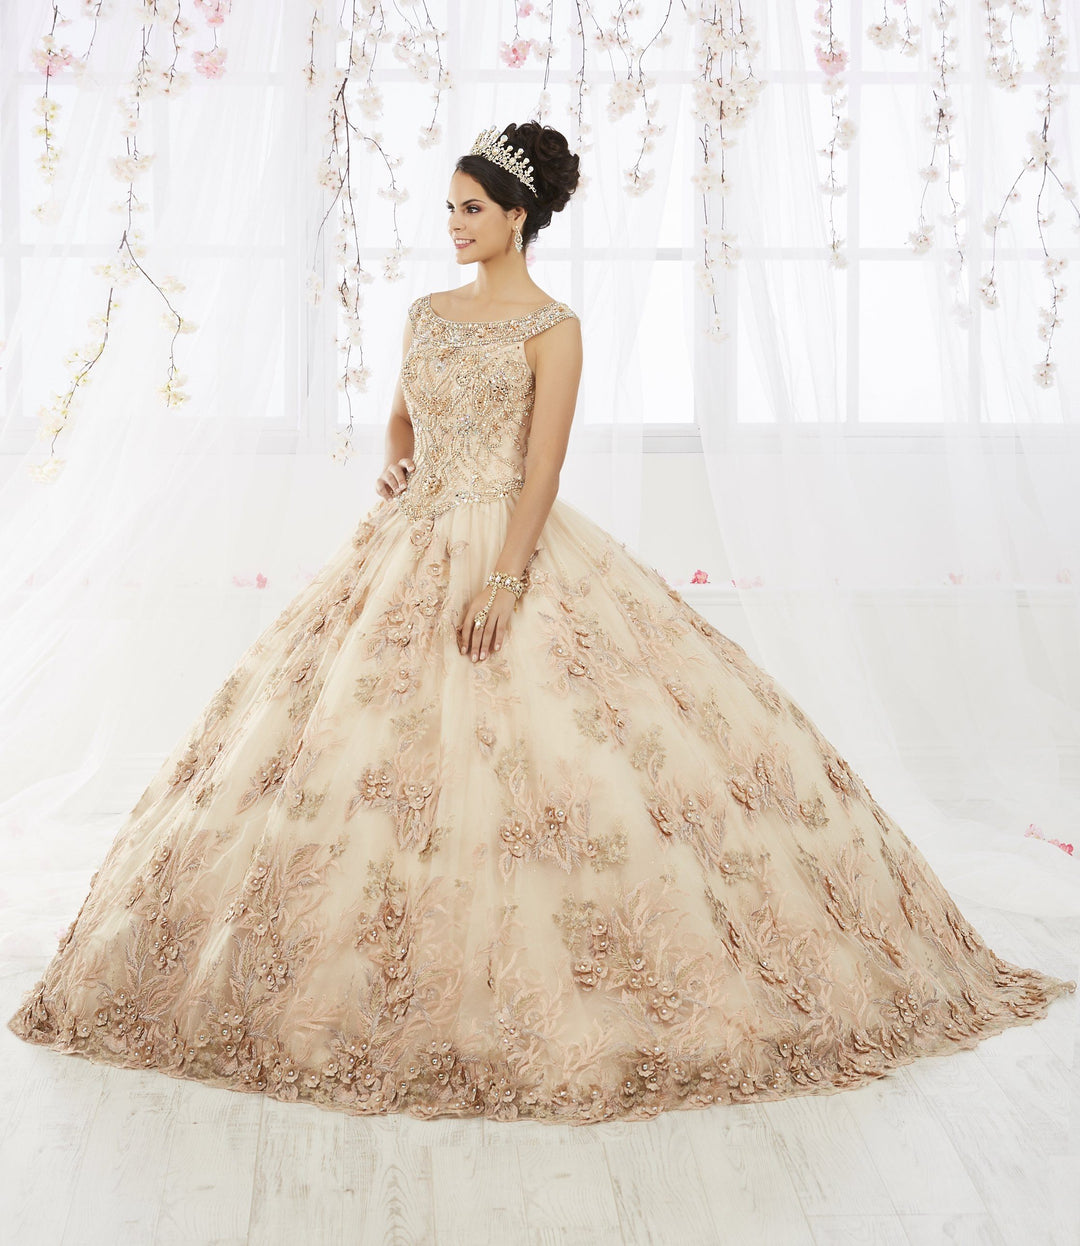 Floral Embroidered Quinceanera Dress by House of Wu 26918-Quinceanera Dresses-ABC Fashion